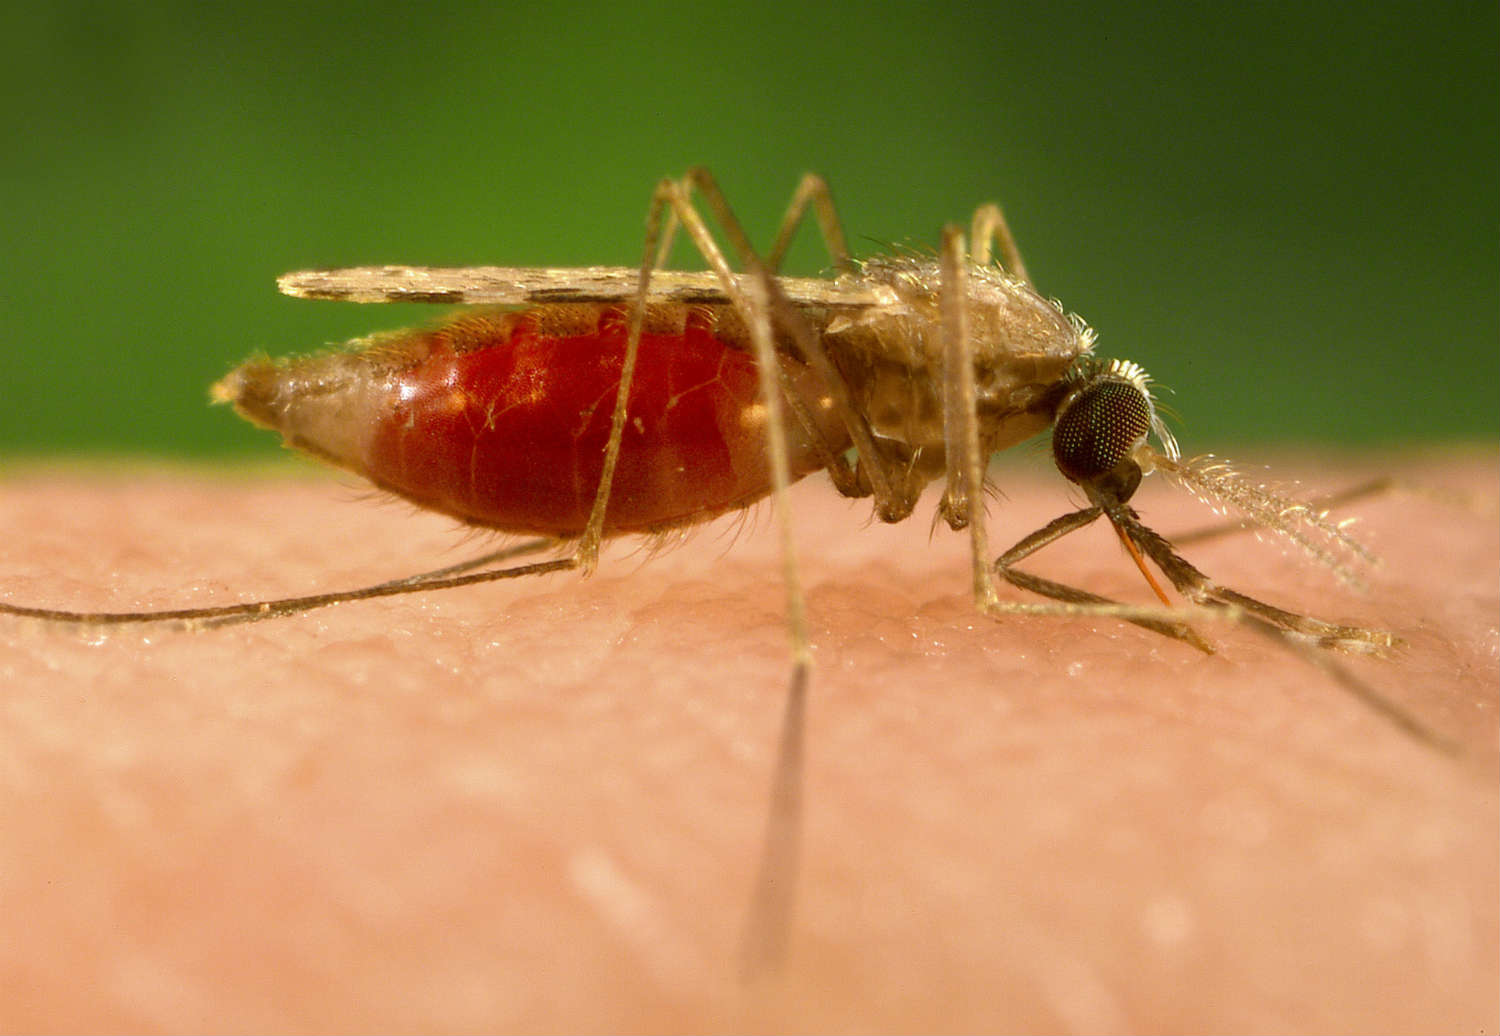 Climate change will expand the range of mosquitoes that transmit malaria (UIG/Getty Images)